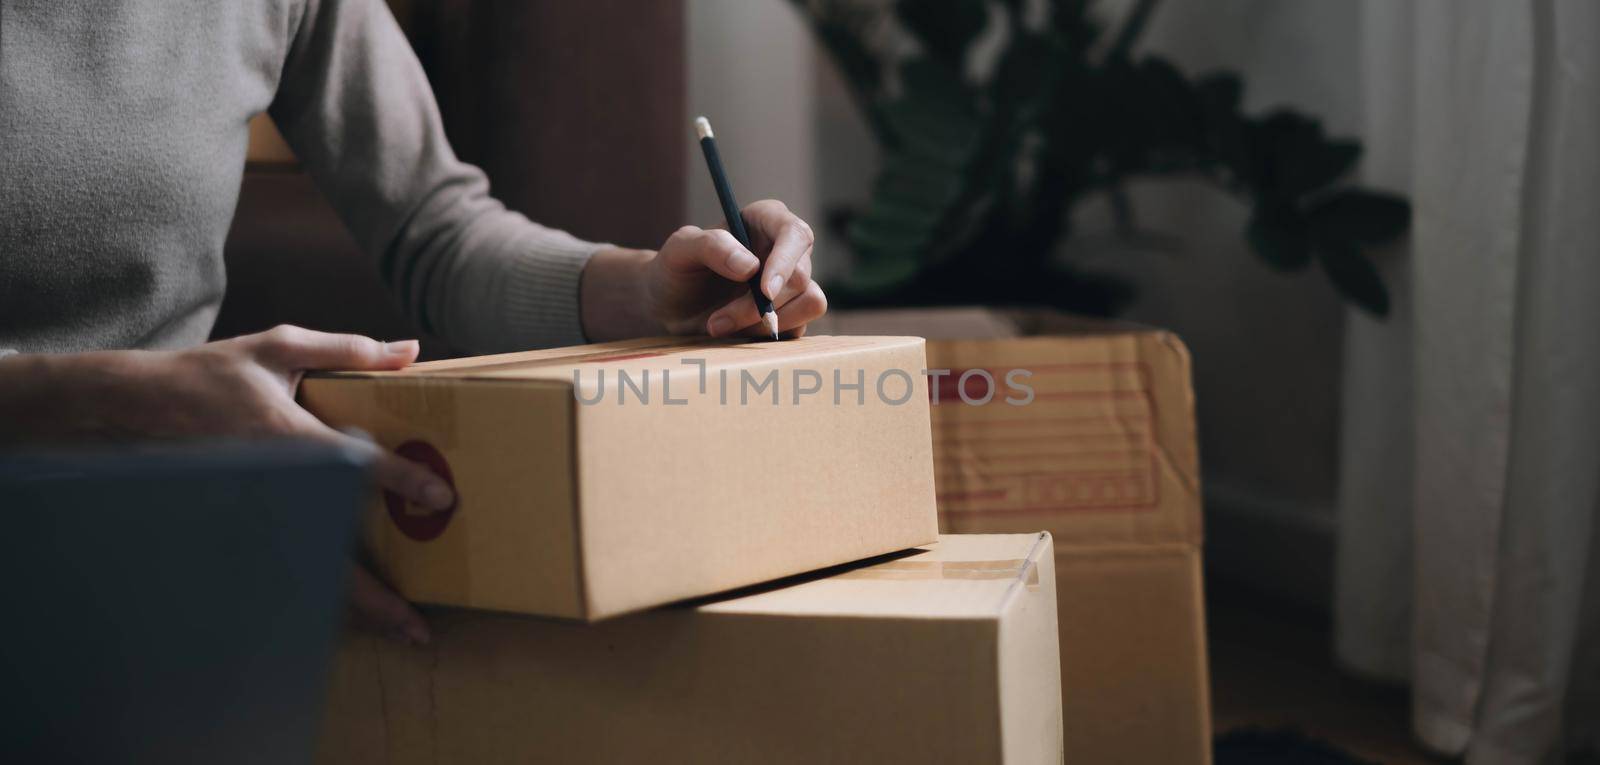 Starting small businesses SME owners female entrepreneurs Write the address on receipt box and check online orders to prepare to pack the boxes, sell to customers, sme business ideas online. by wichayada